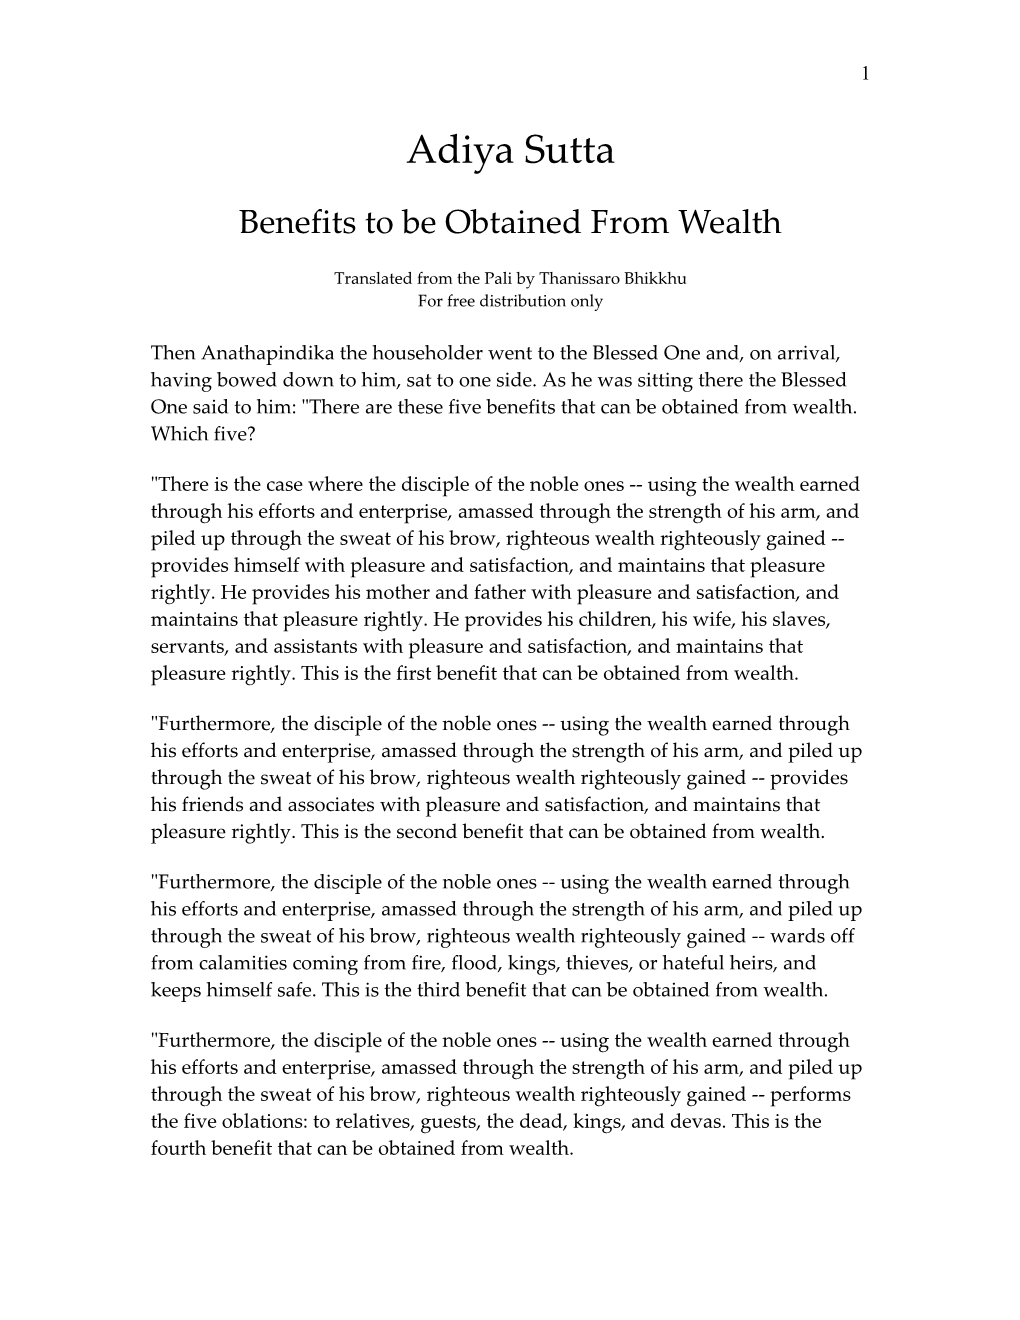 Benefits to Be Obtained from Wealth